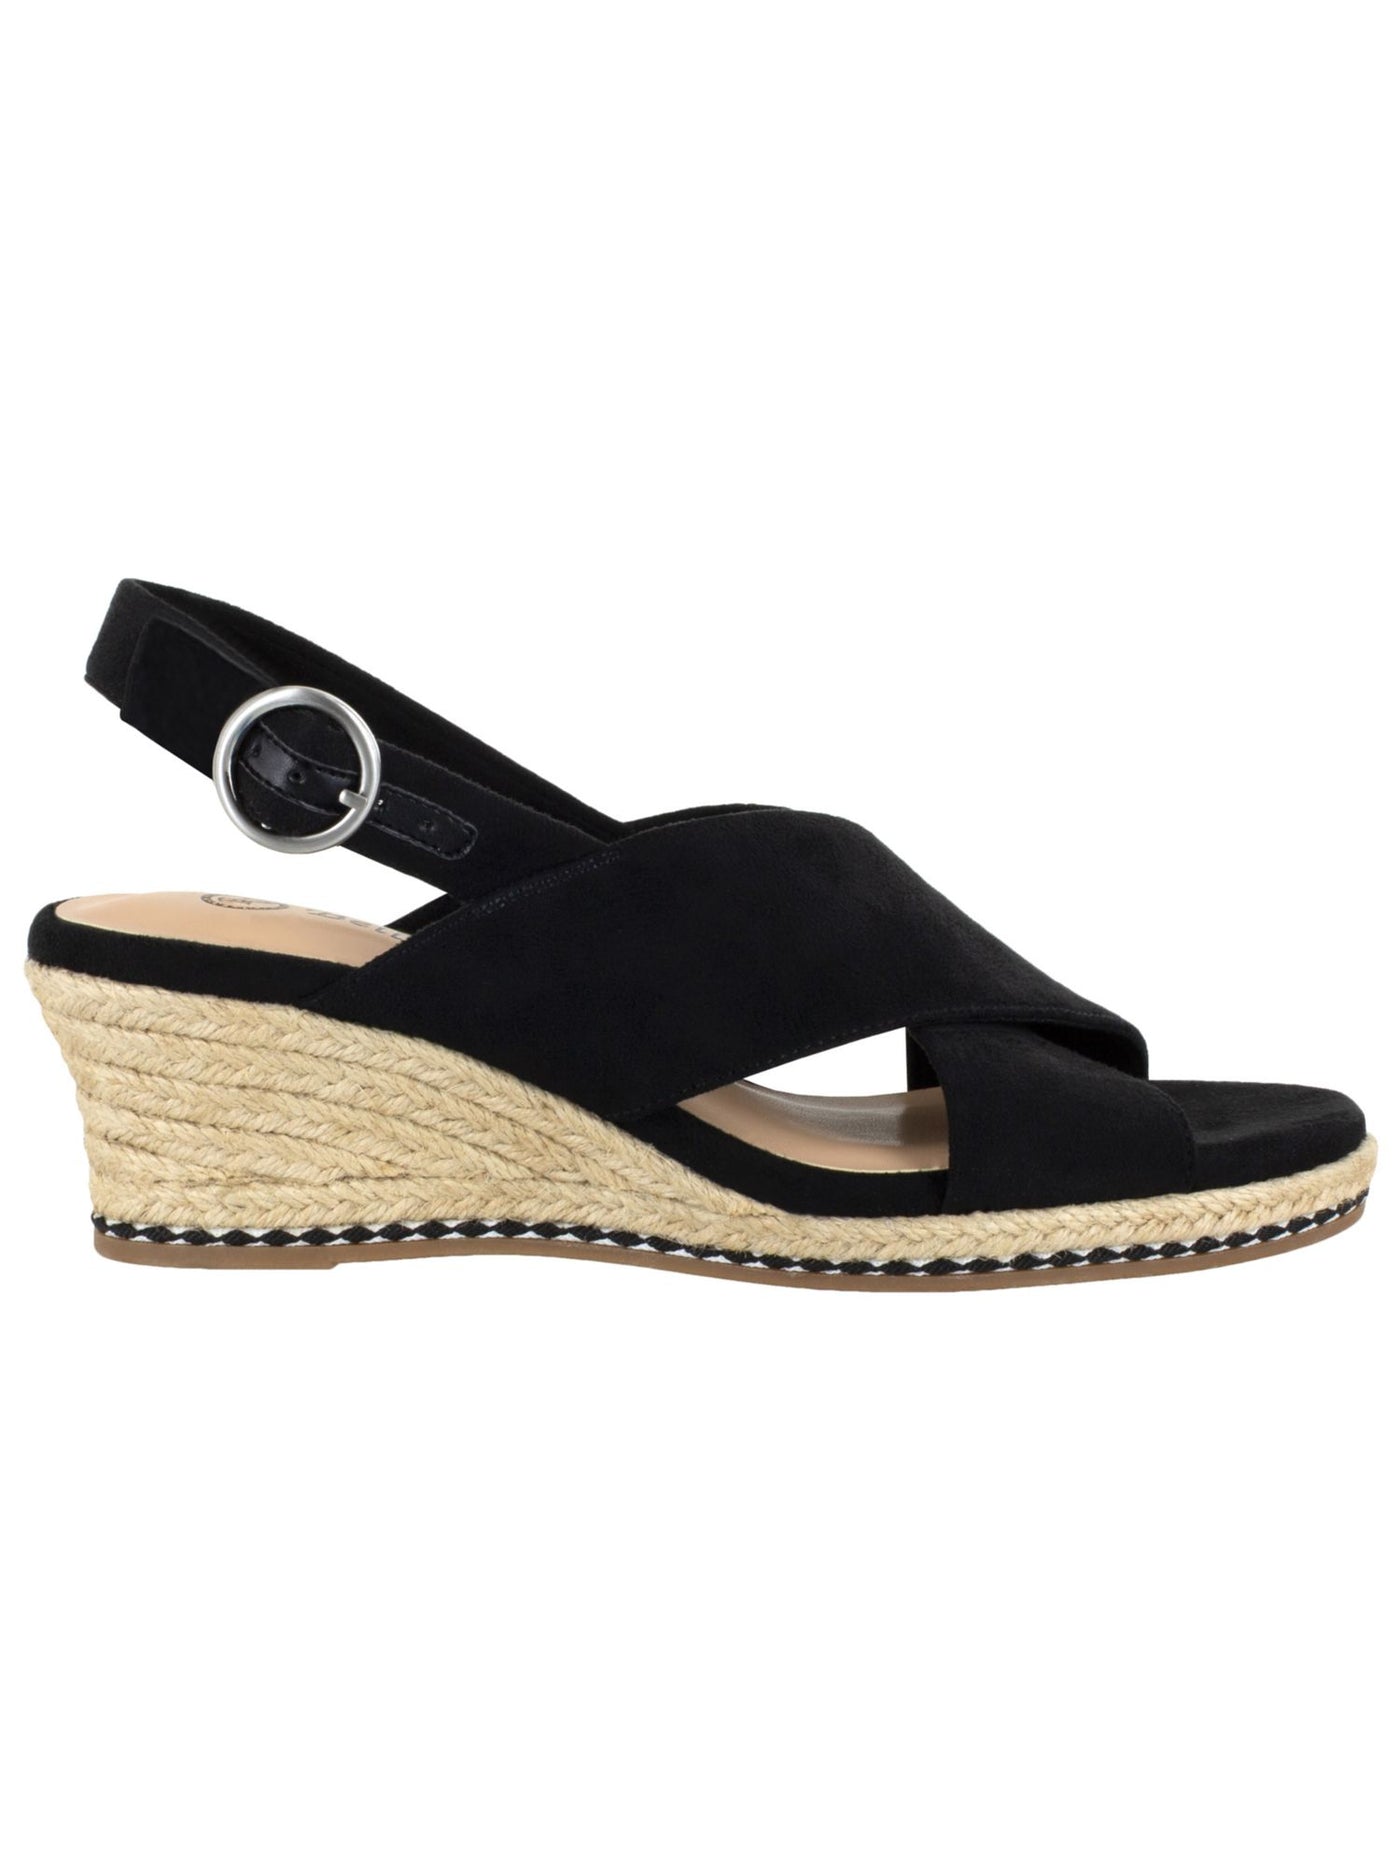 BELLA VITA Womens Black Jute Wrapped Crisscross Straps Braided Accent Adjustable Strap Cushioned Nadette Ii Round Toe Wedge Buckle Espadrille Shoes 6.5 N